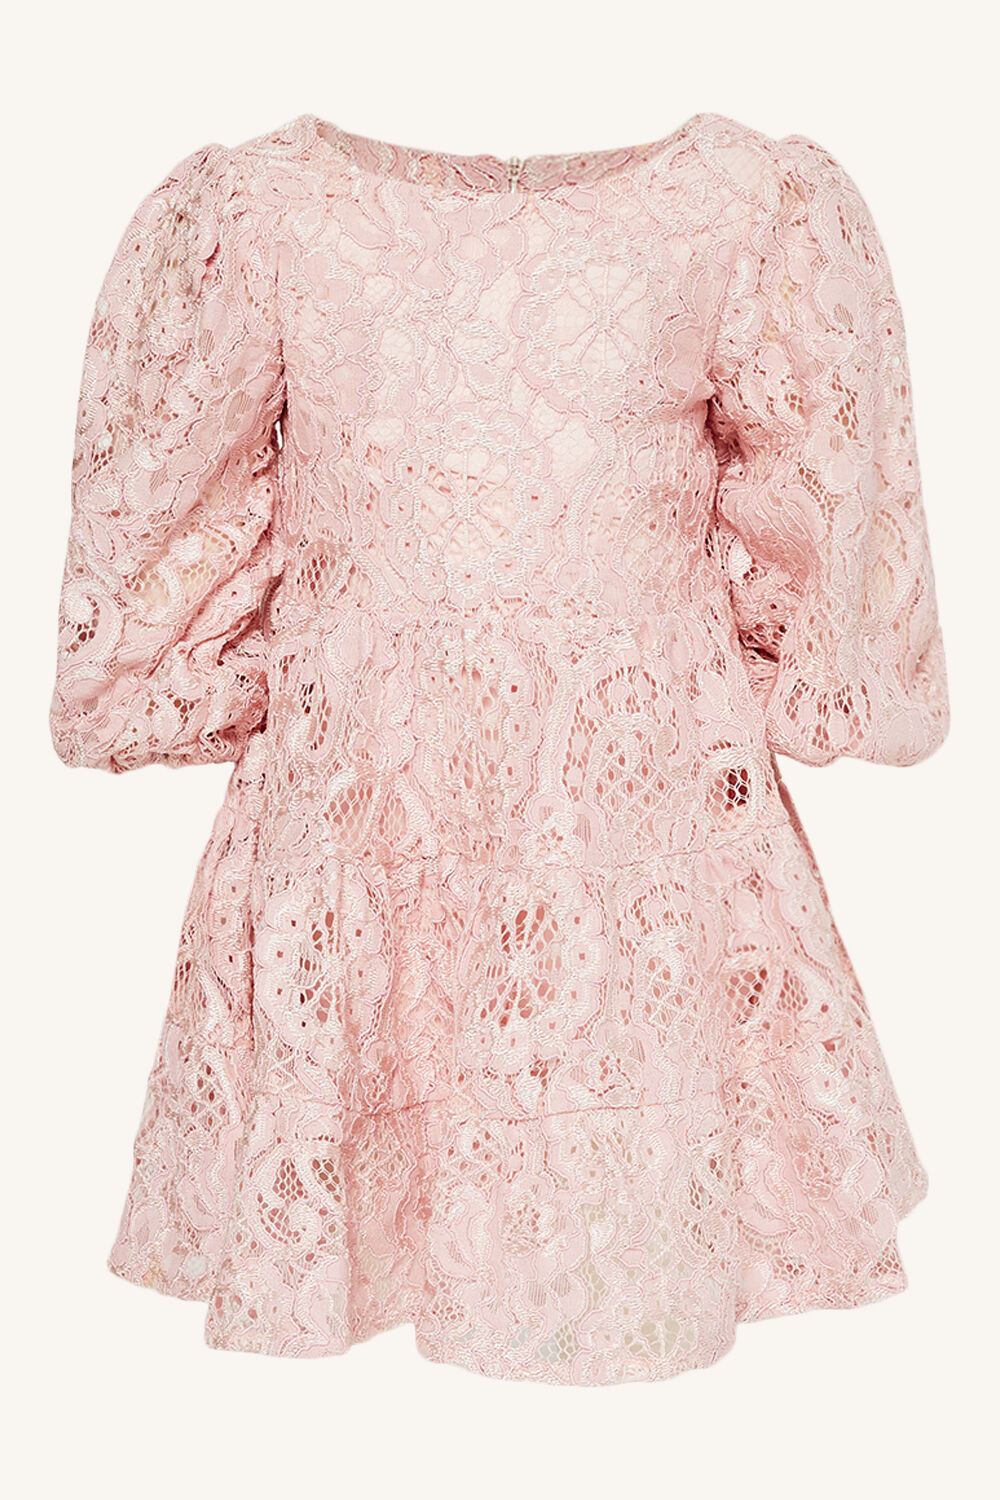 BABY GIRL ELLA LACE DRESS in colour SOFT PINK